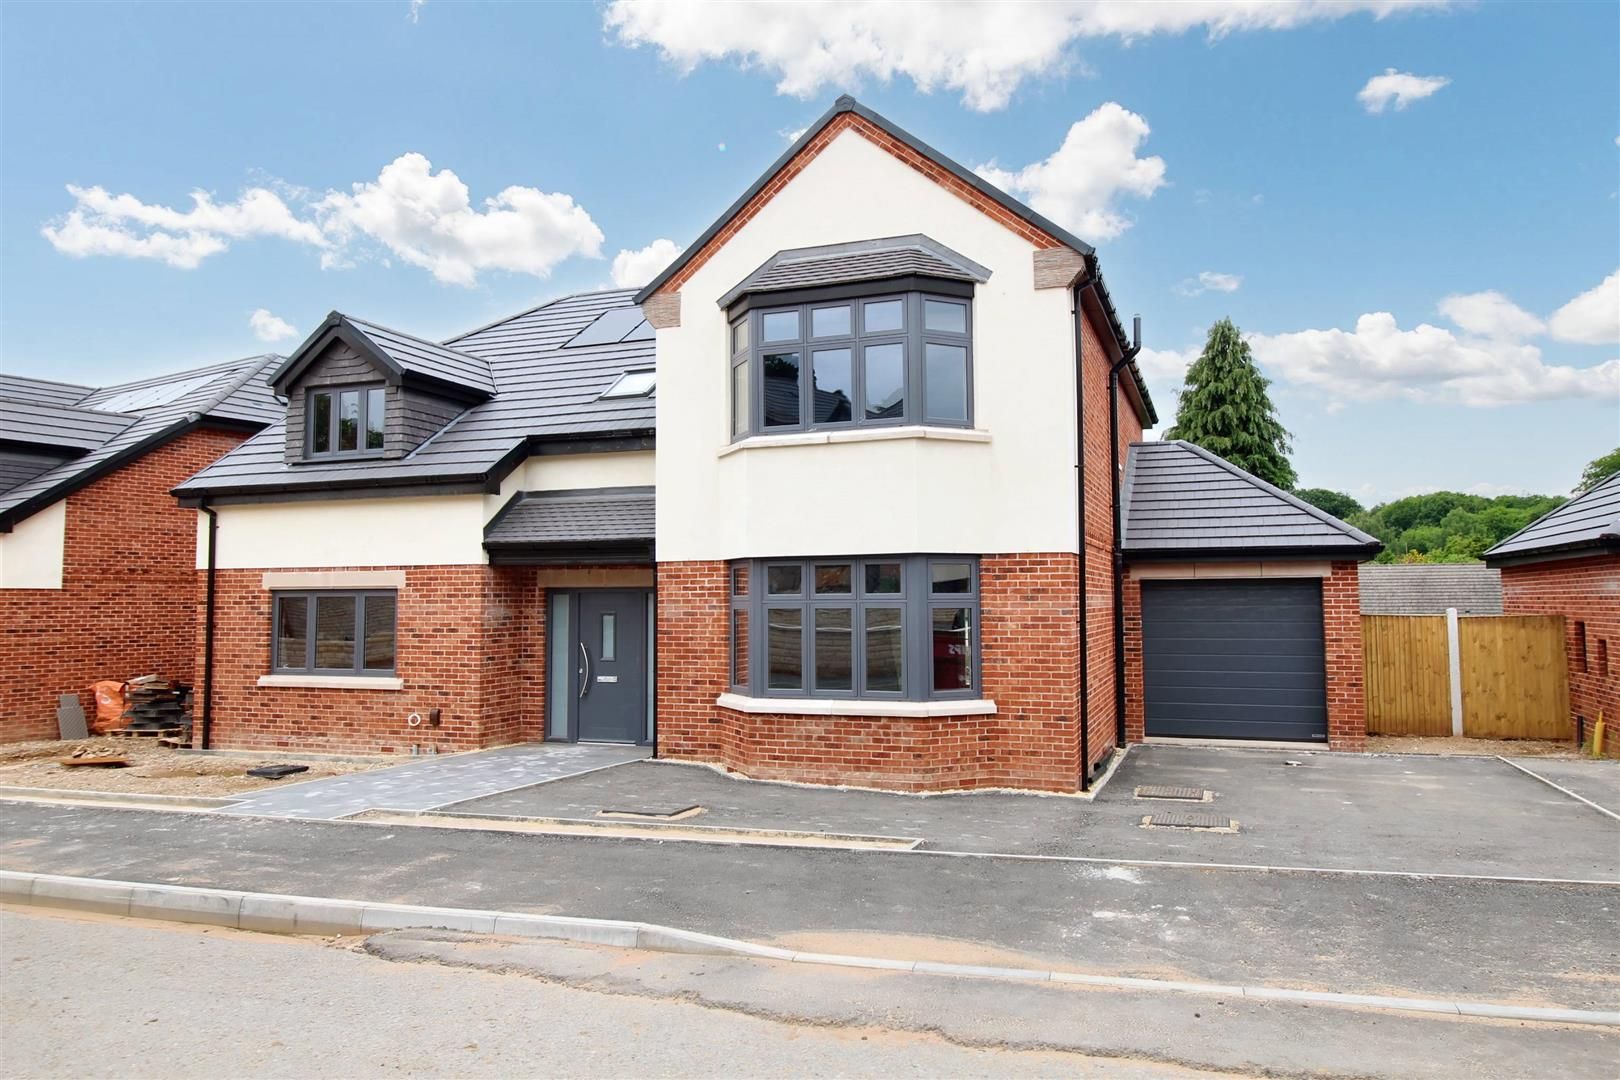 Bletchley Close, Beeston, Nottingham, NG9 2WR